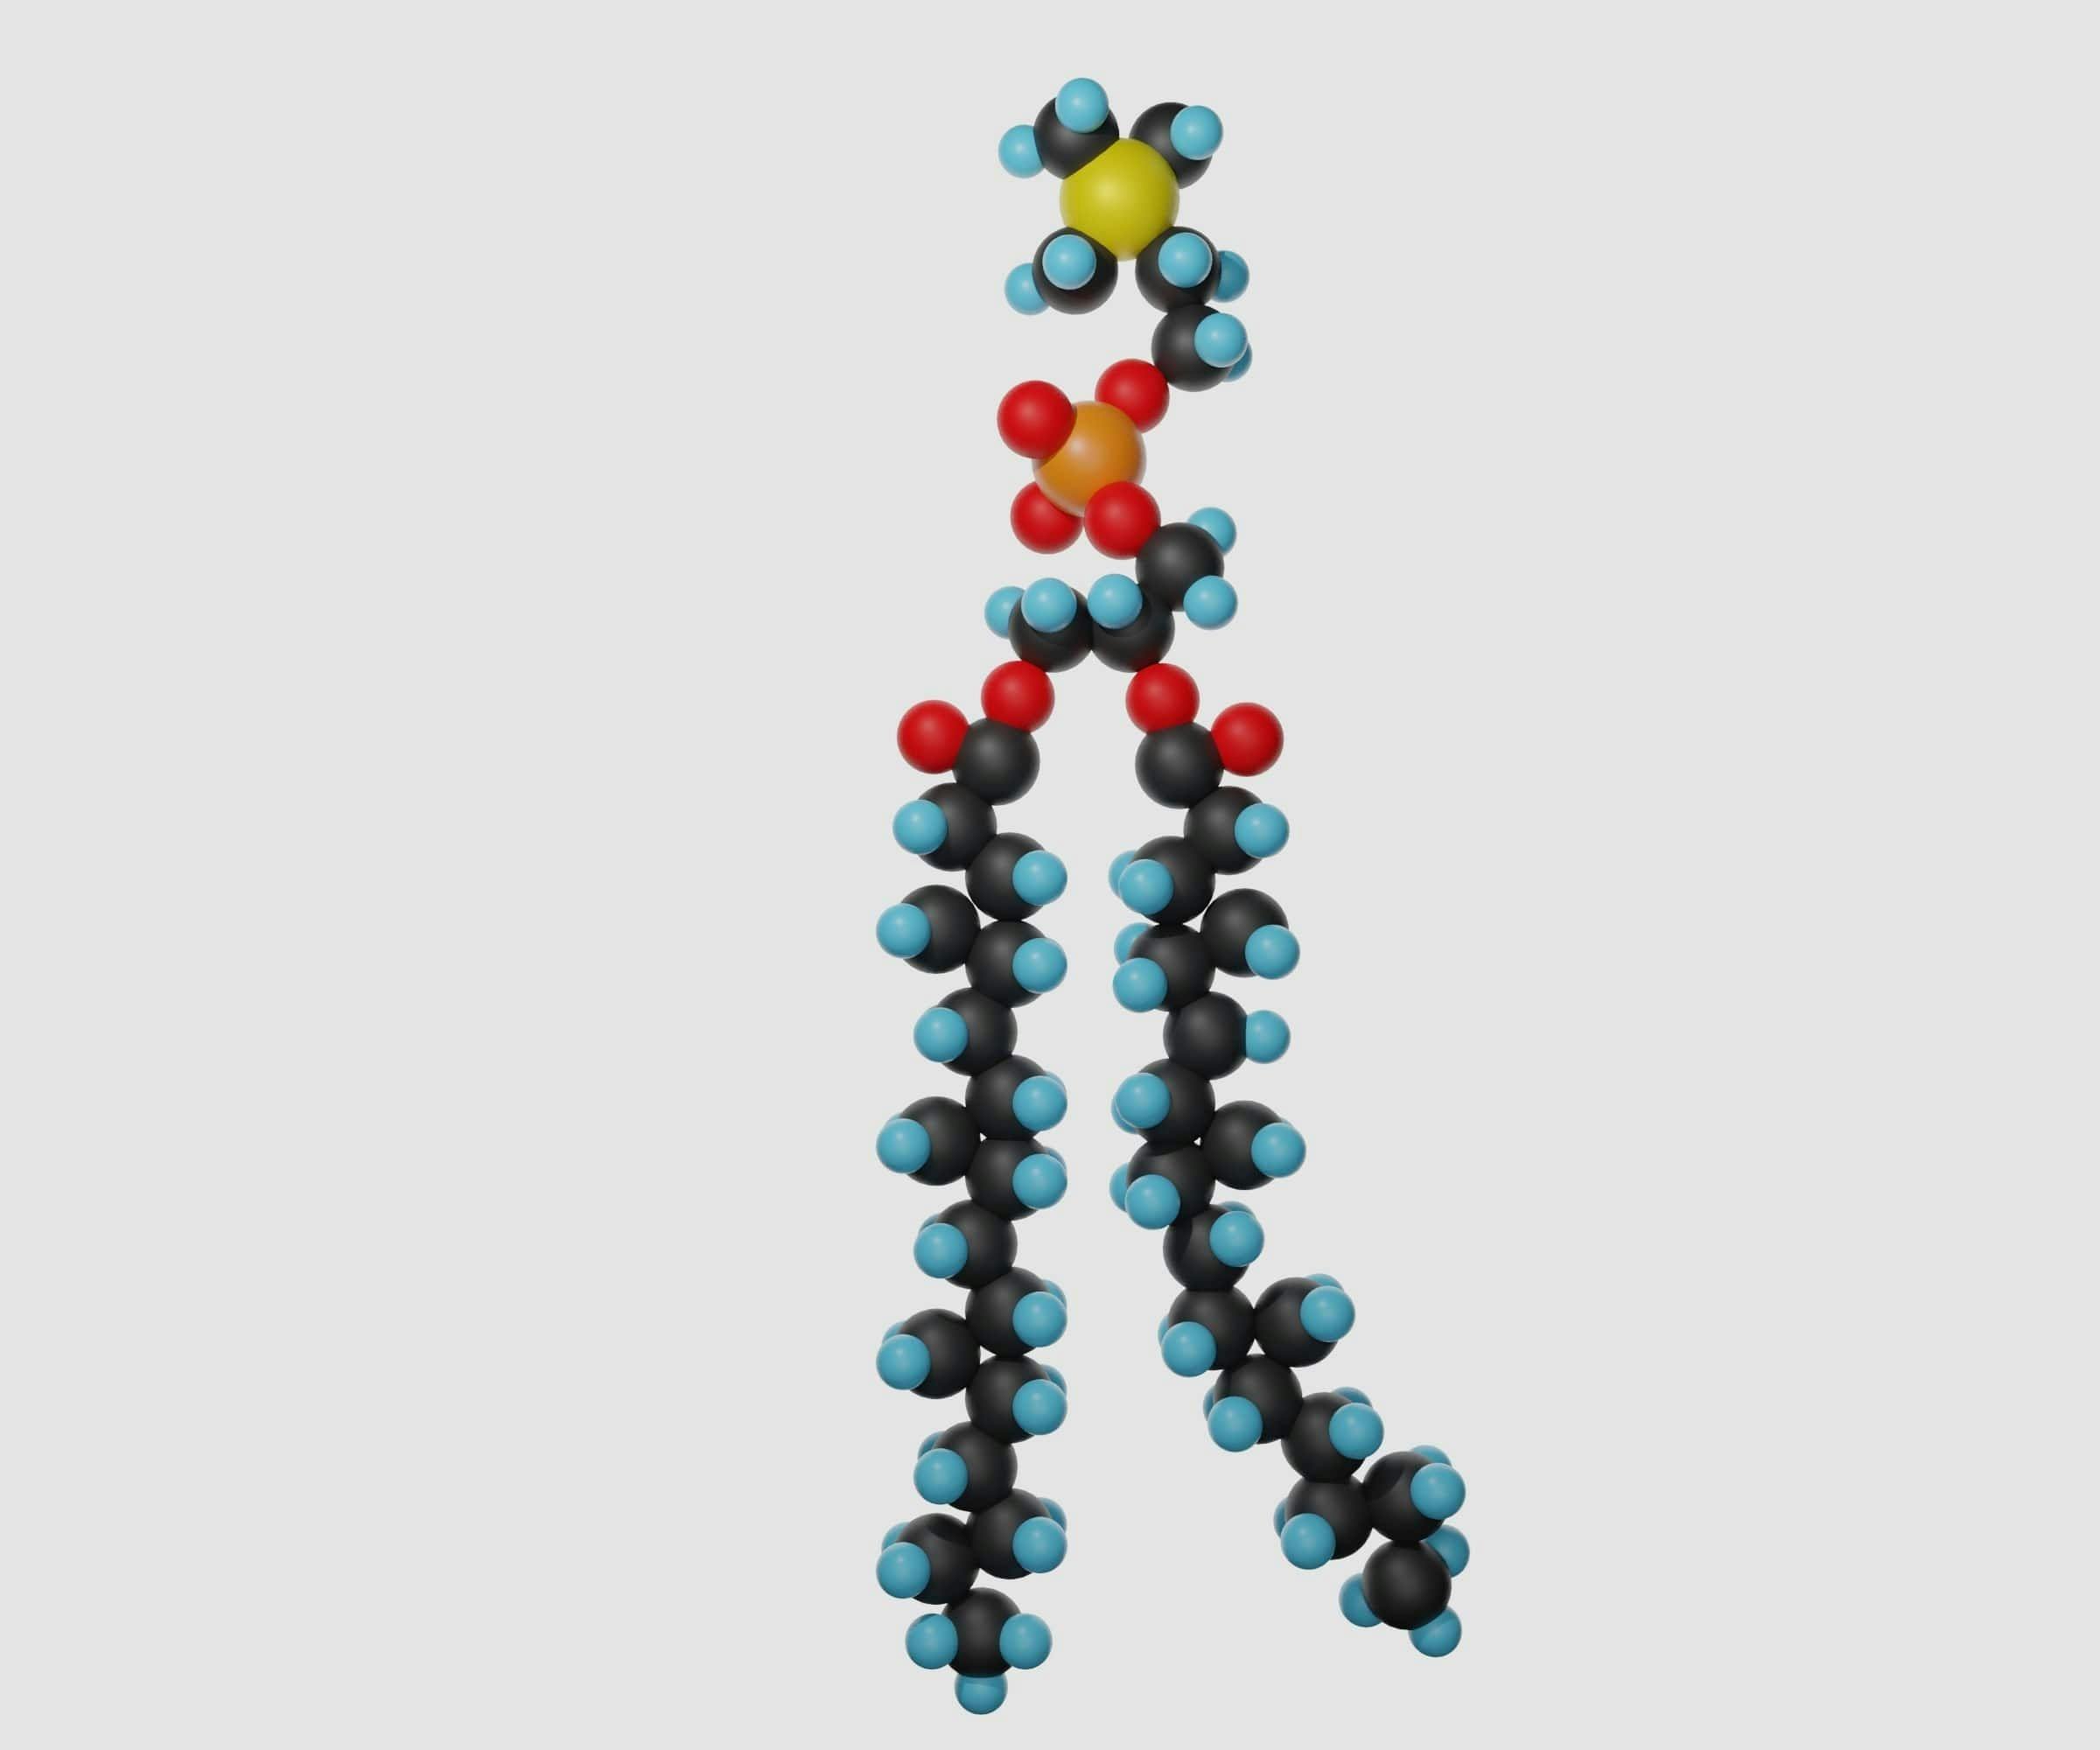 isolated Structure of phospholipid molecules 3d rendering | Image Credit: © Love Employee - stock.adobe.com